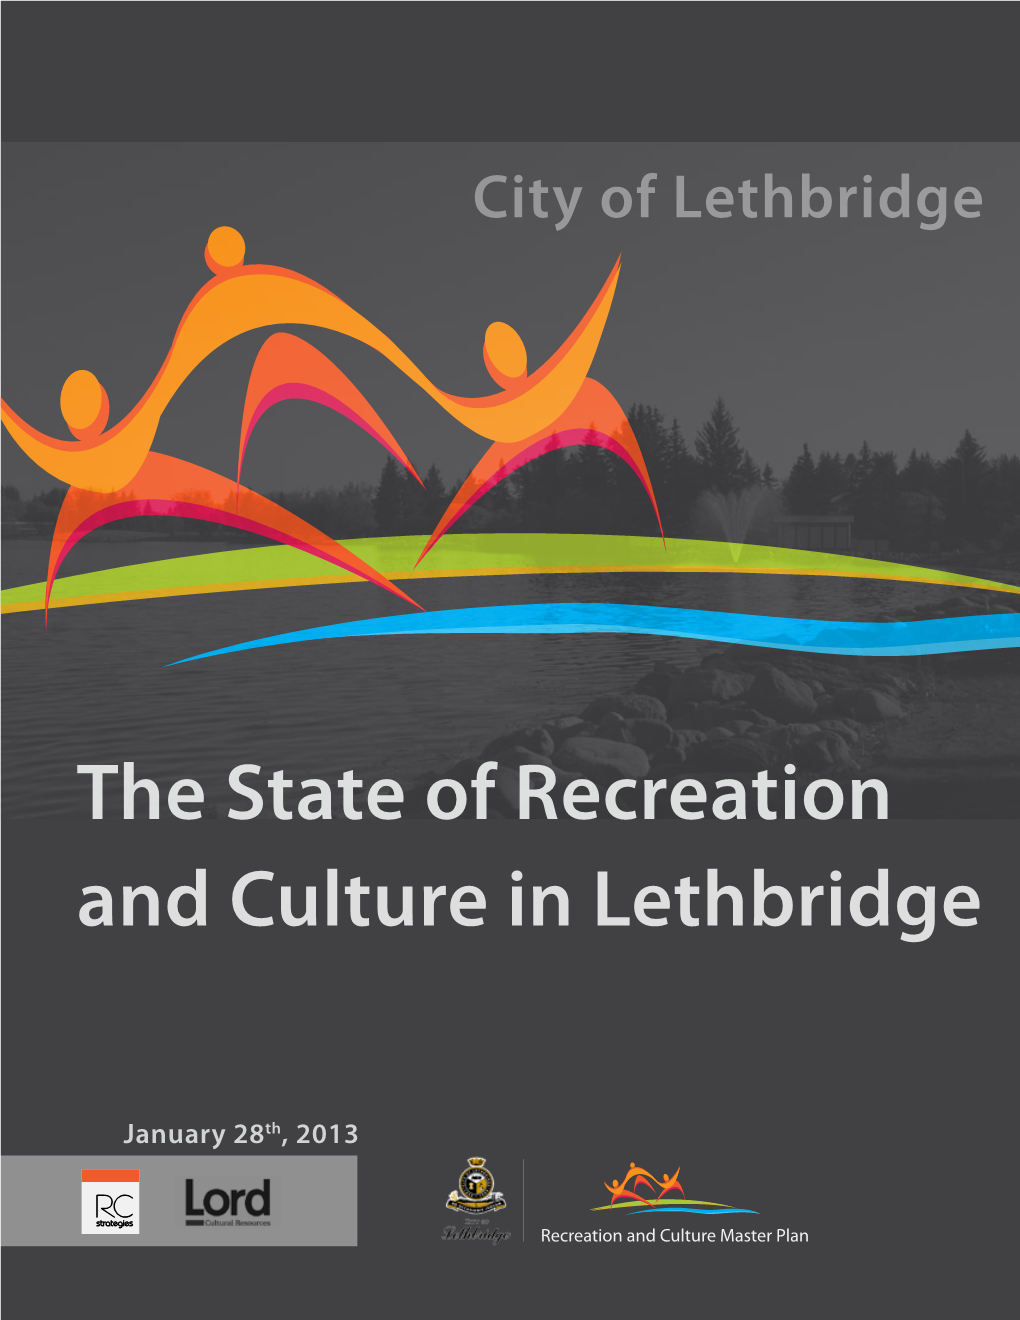 The State of Recreation and Culture in Lethbridge